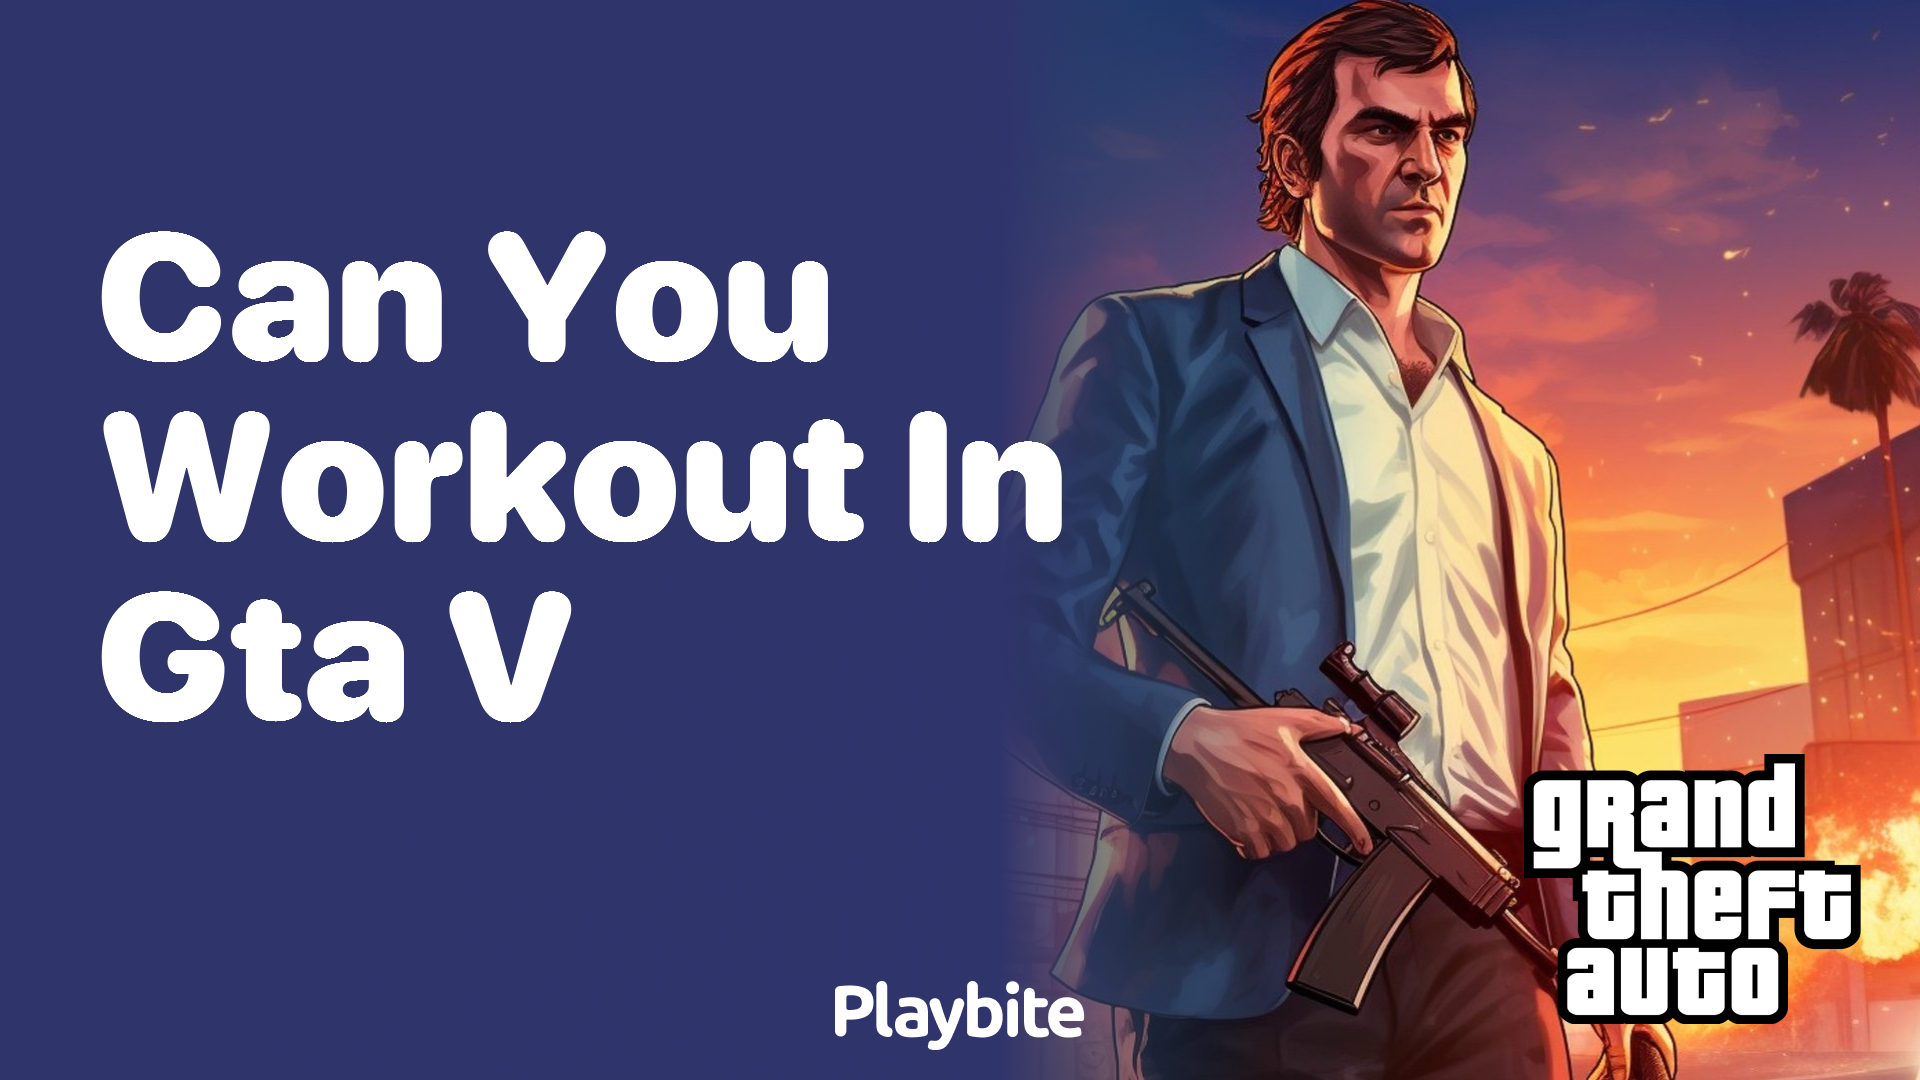 Can you workout in GTA V?